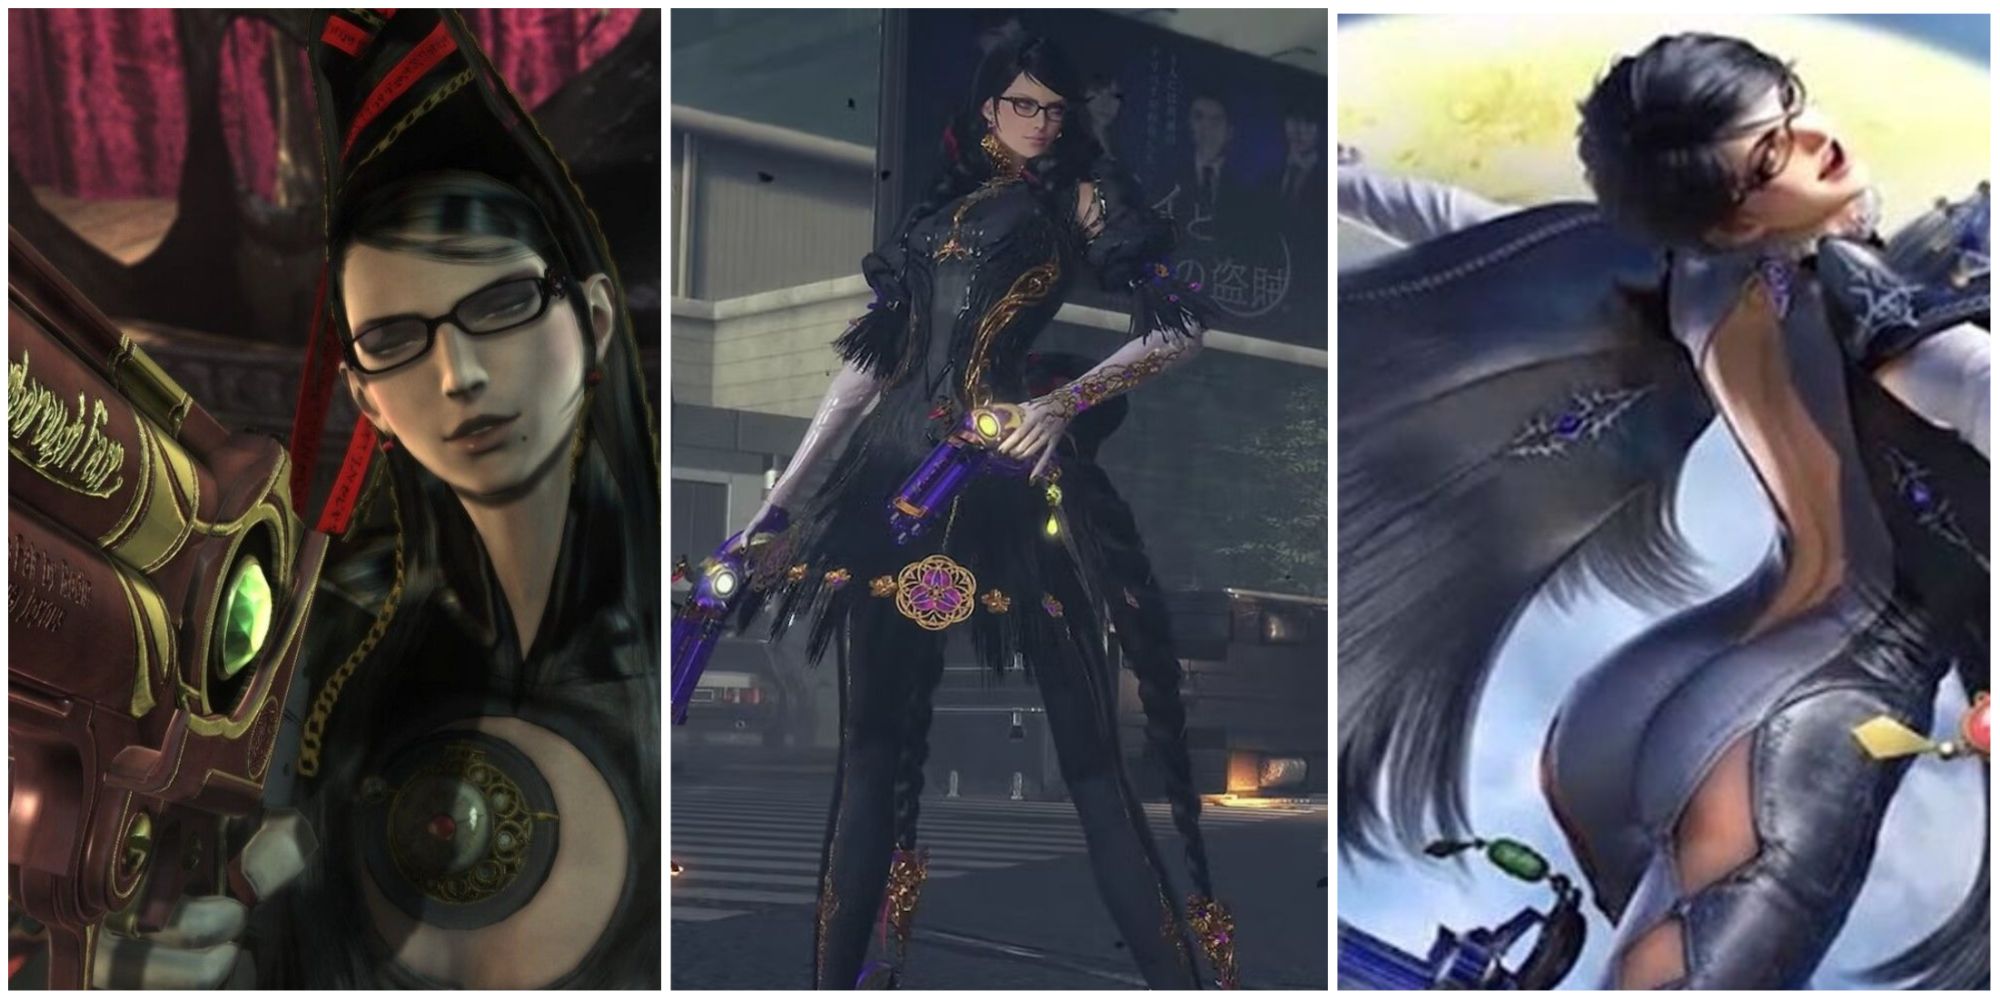 Bayonetta from the original game pointing her gun, Bayonetta as she appears in the third game, and Bayonetta as she appears on the cover of the second game, left to right